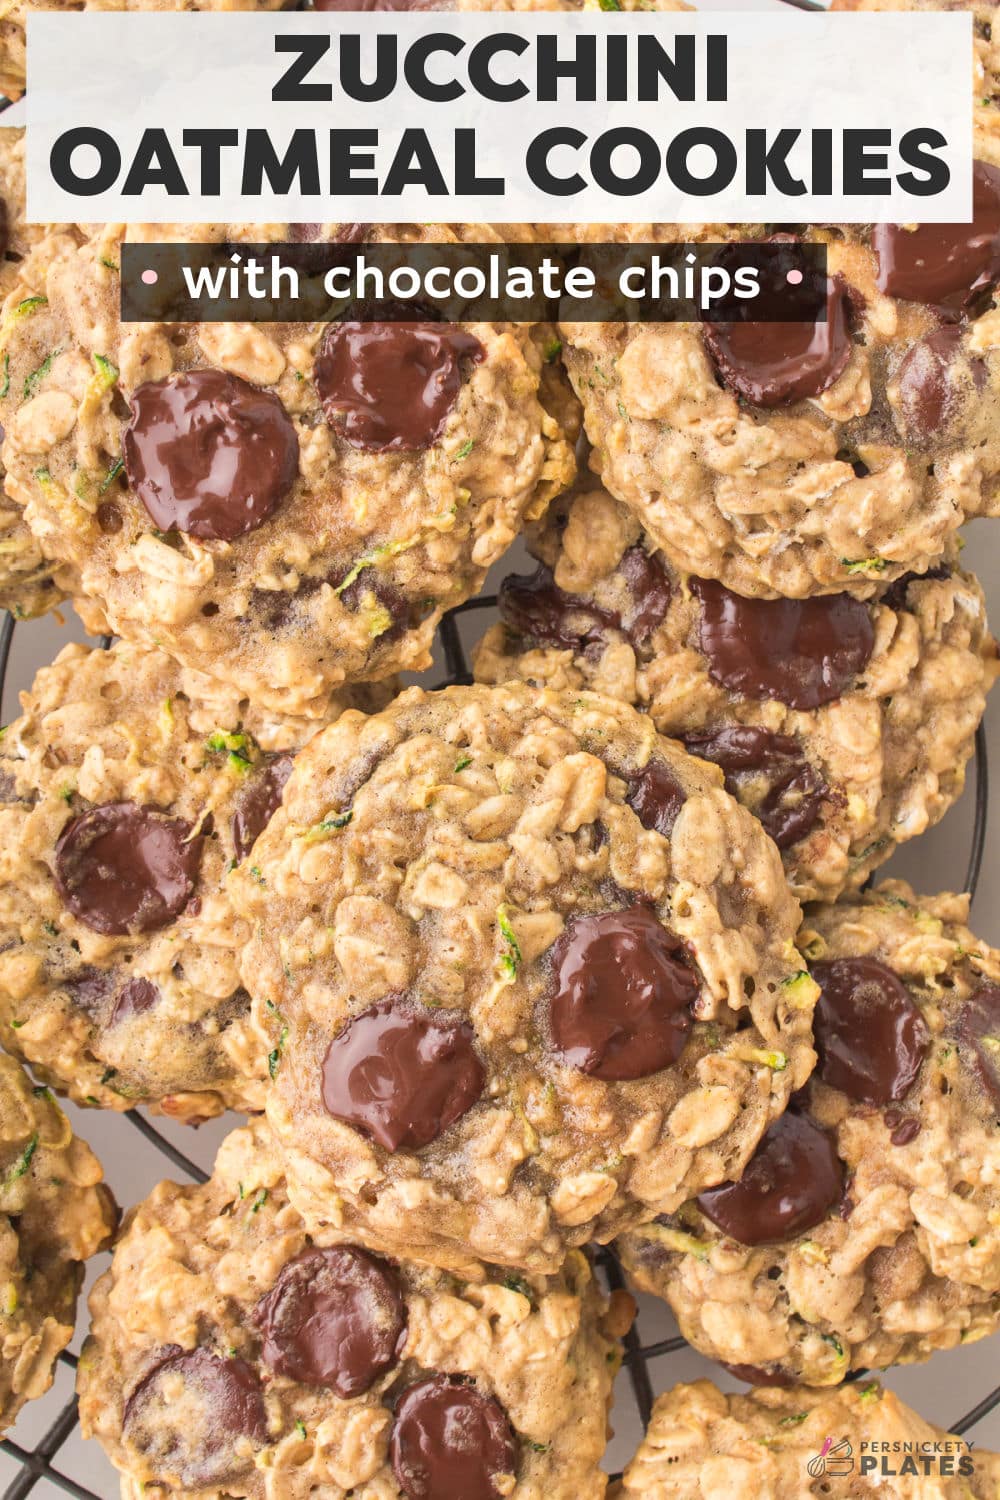 These Zucchini Oatmeal Cookies are soft, chewy, and full of chocolate chips! If you like zucchini bread, you're going to love when grated zucchini is hidden in your cookies. | www.persnicketyplates.com